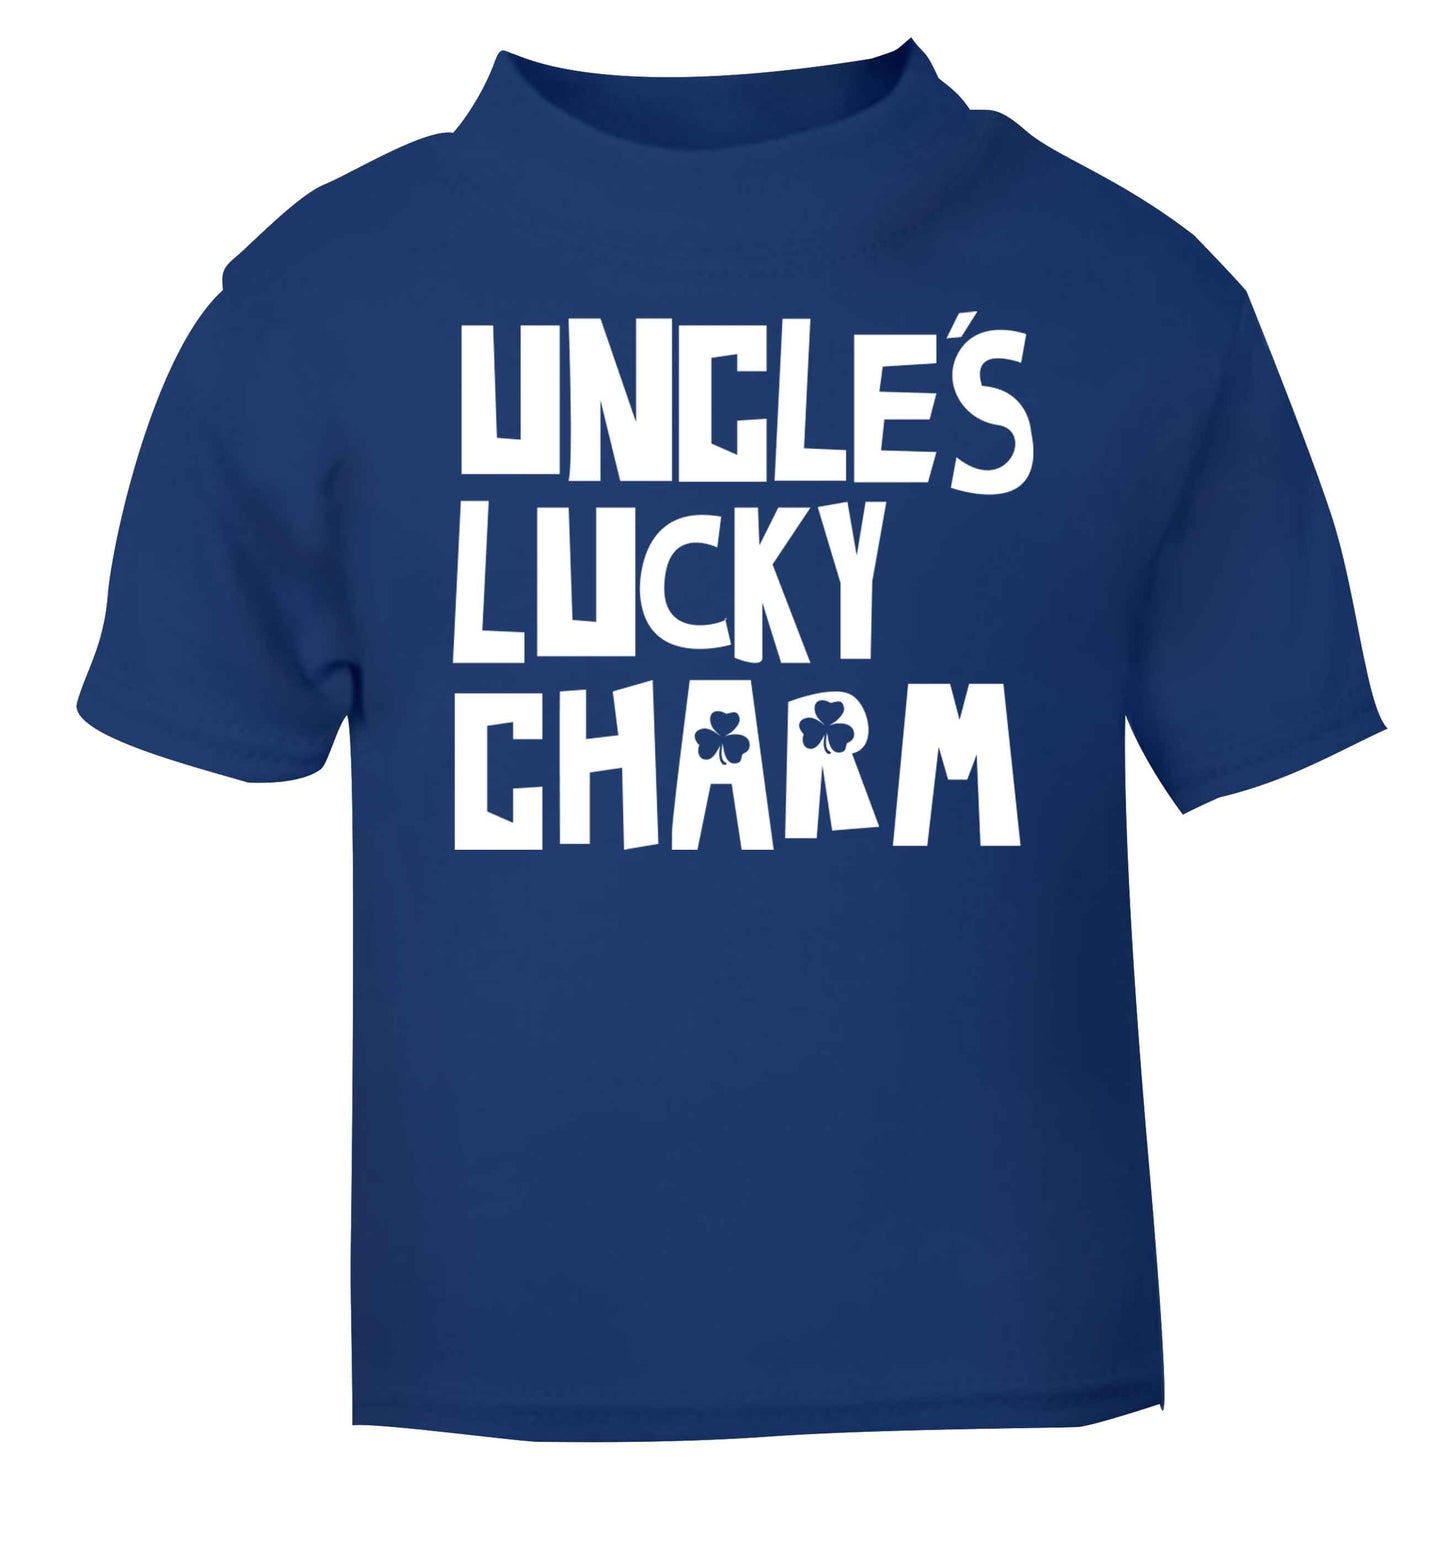 Uncles lucky charm blue baby toddler Tshirt 2 Years